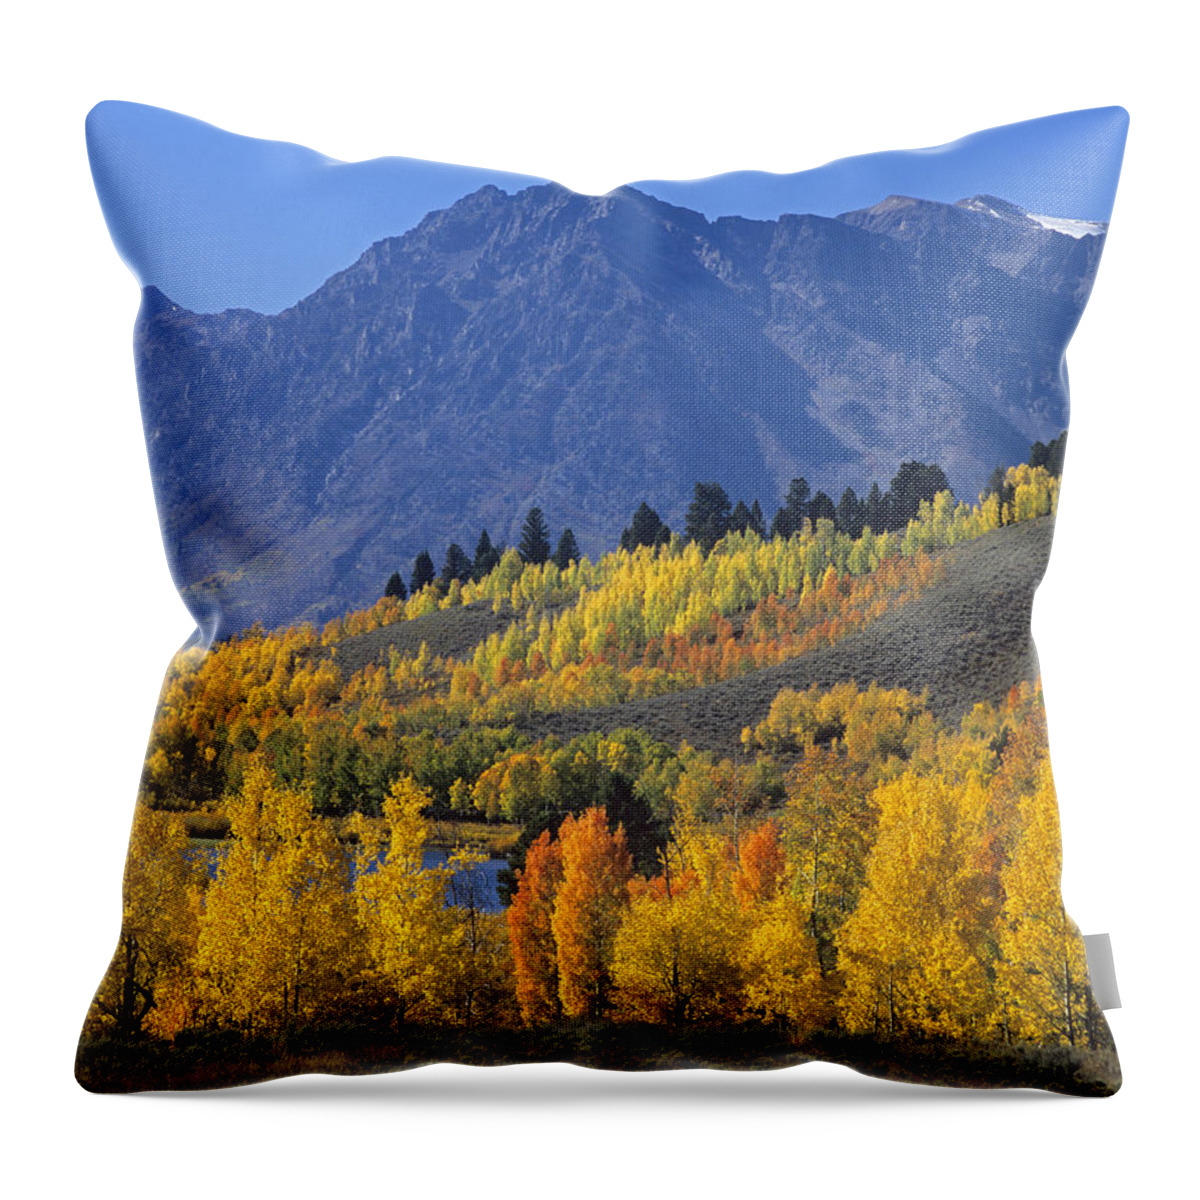 00175916 Throw Pillow featuring the photograph Quaking Aspen Forest In Autumn by Tim Fitzharris